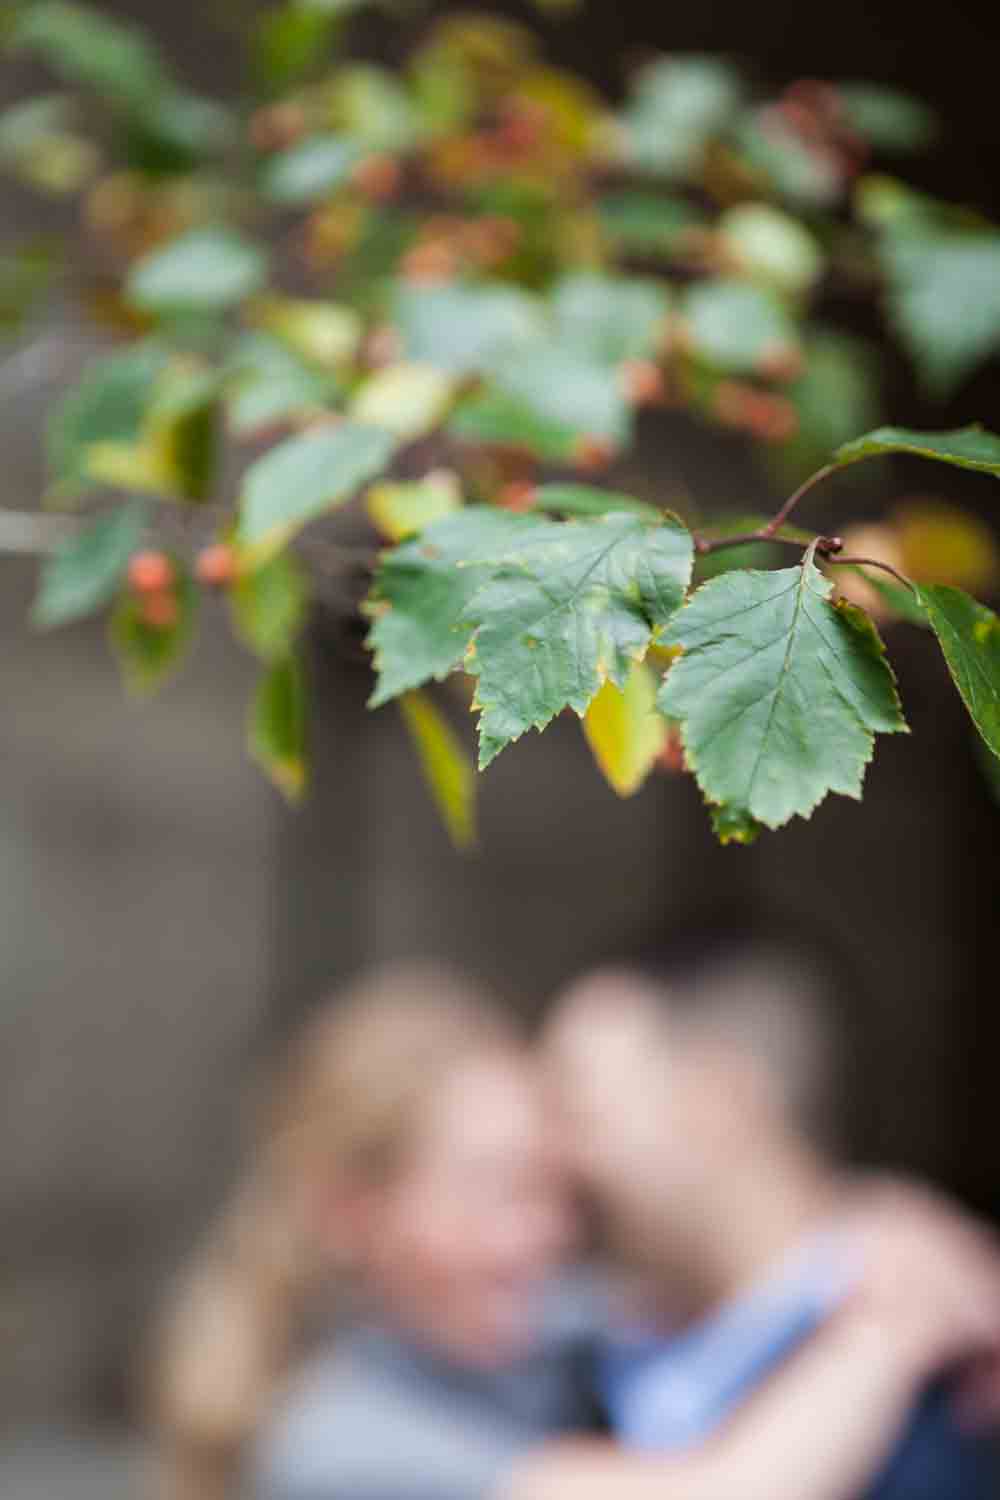 Leaves in focus with couple kissing in background out of focus